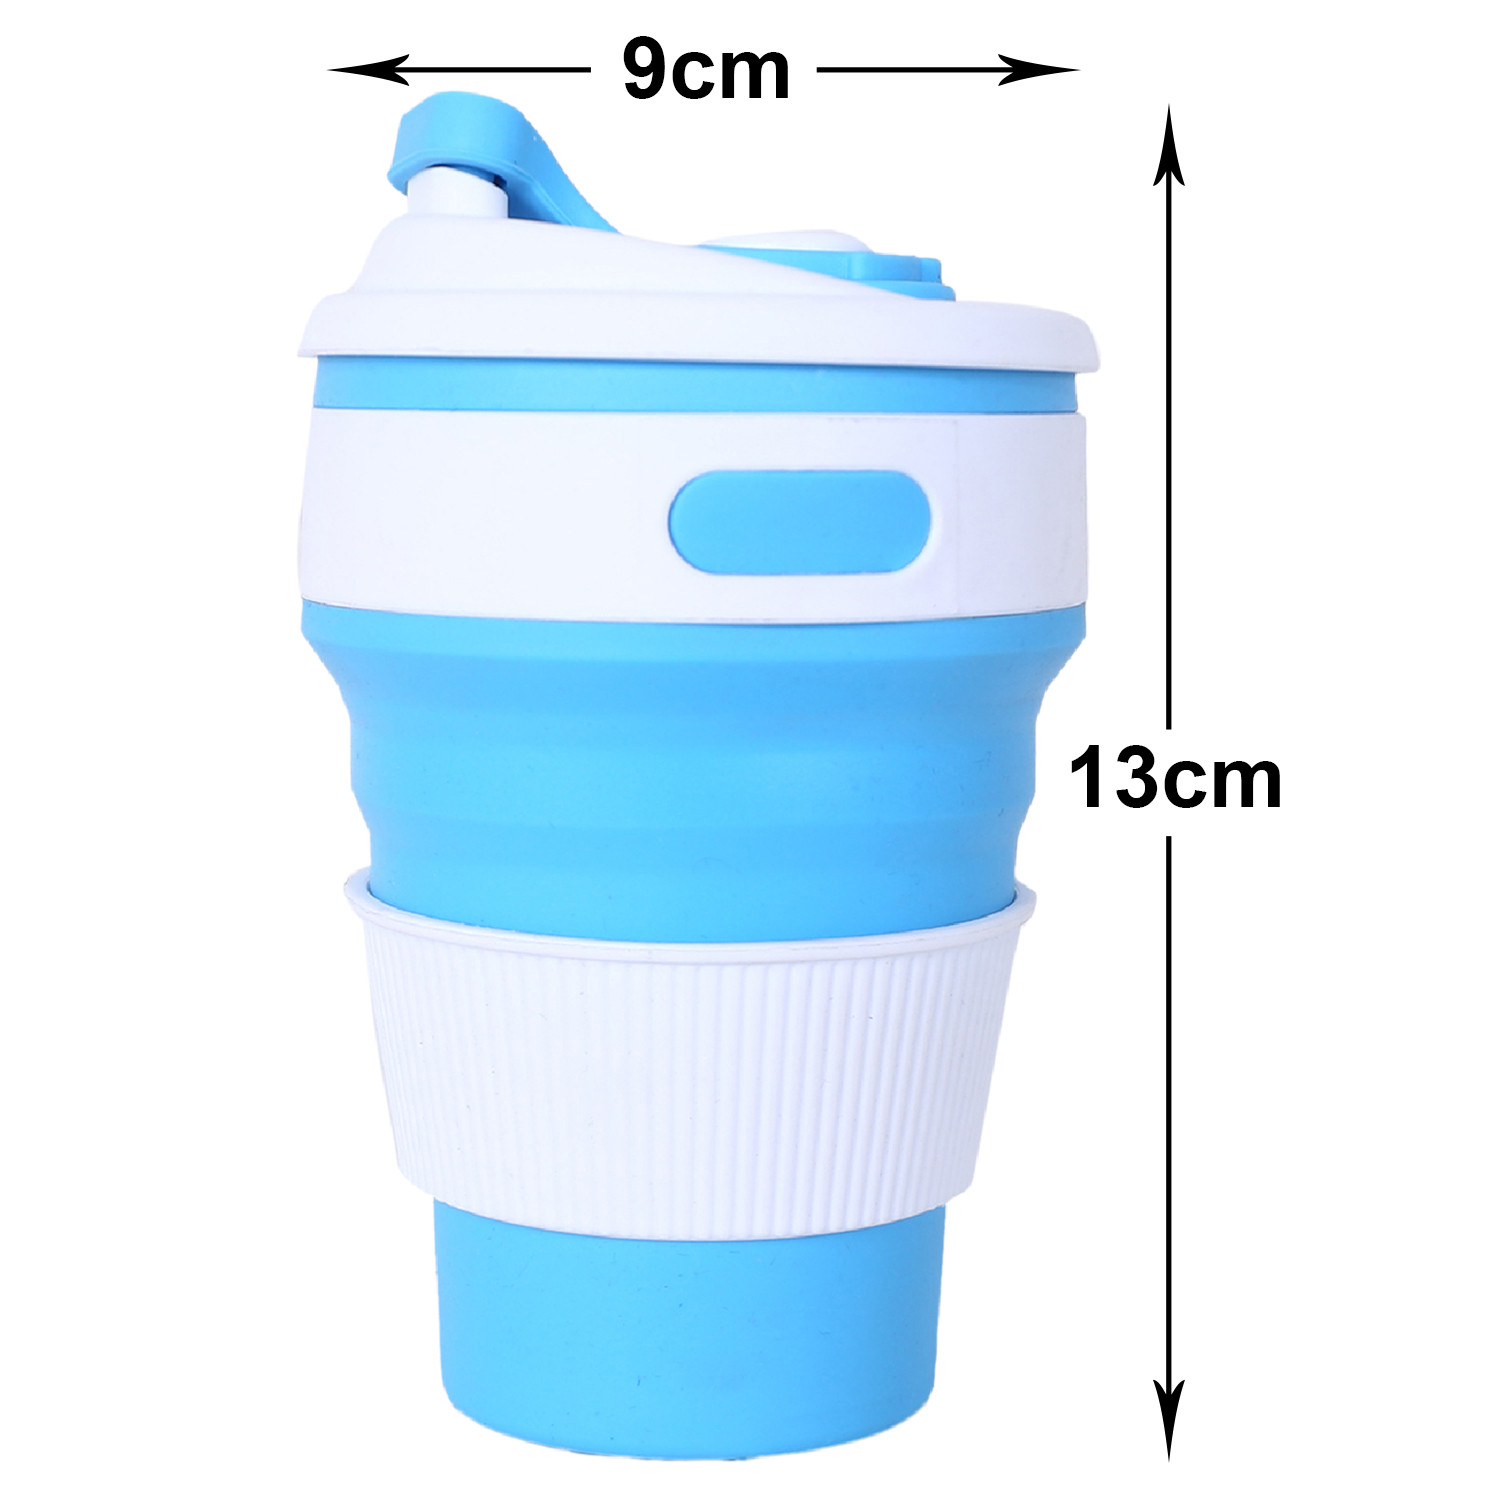 Kuber Industries Collapsible Coffee Cup|Silicone Portable Travel Coffee Mug|Camping Cup with Lid for Travel,Hiking Outdoors,350 ML,(Blue)